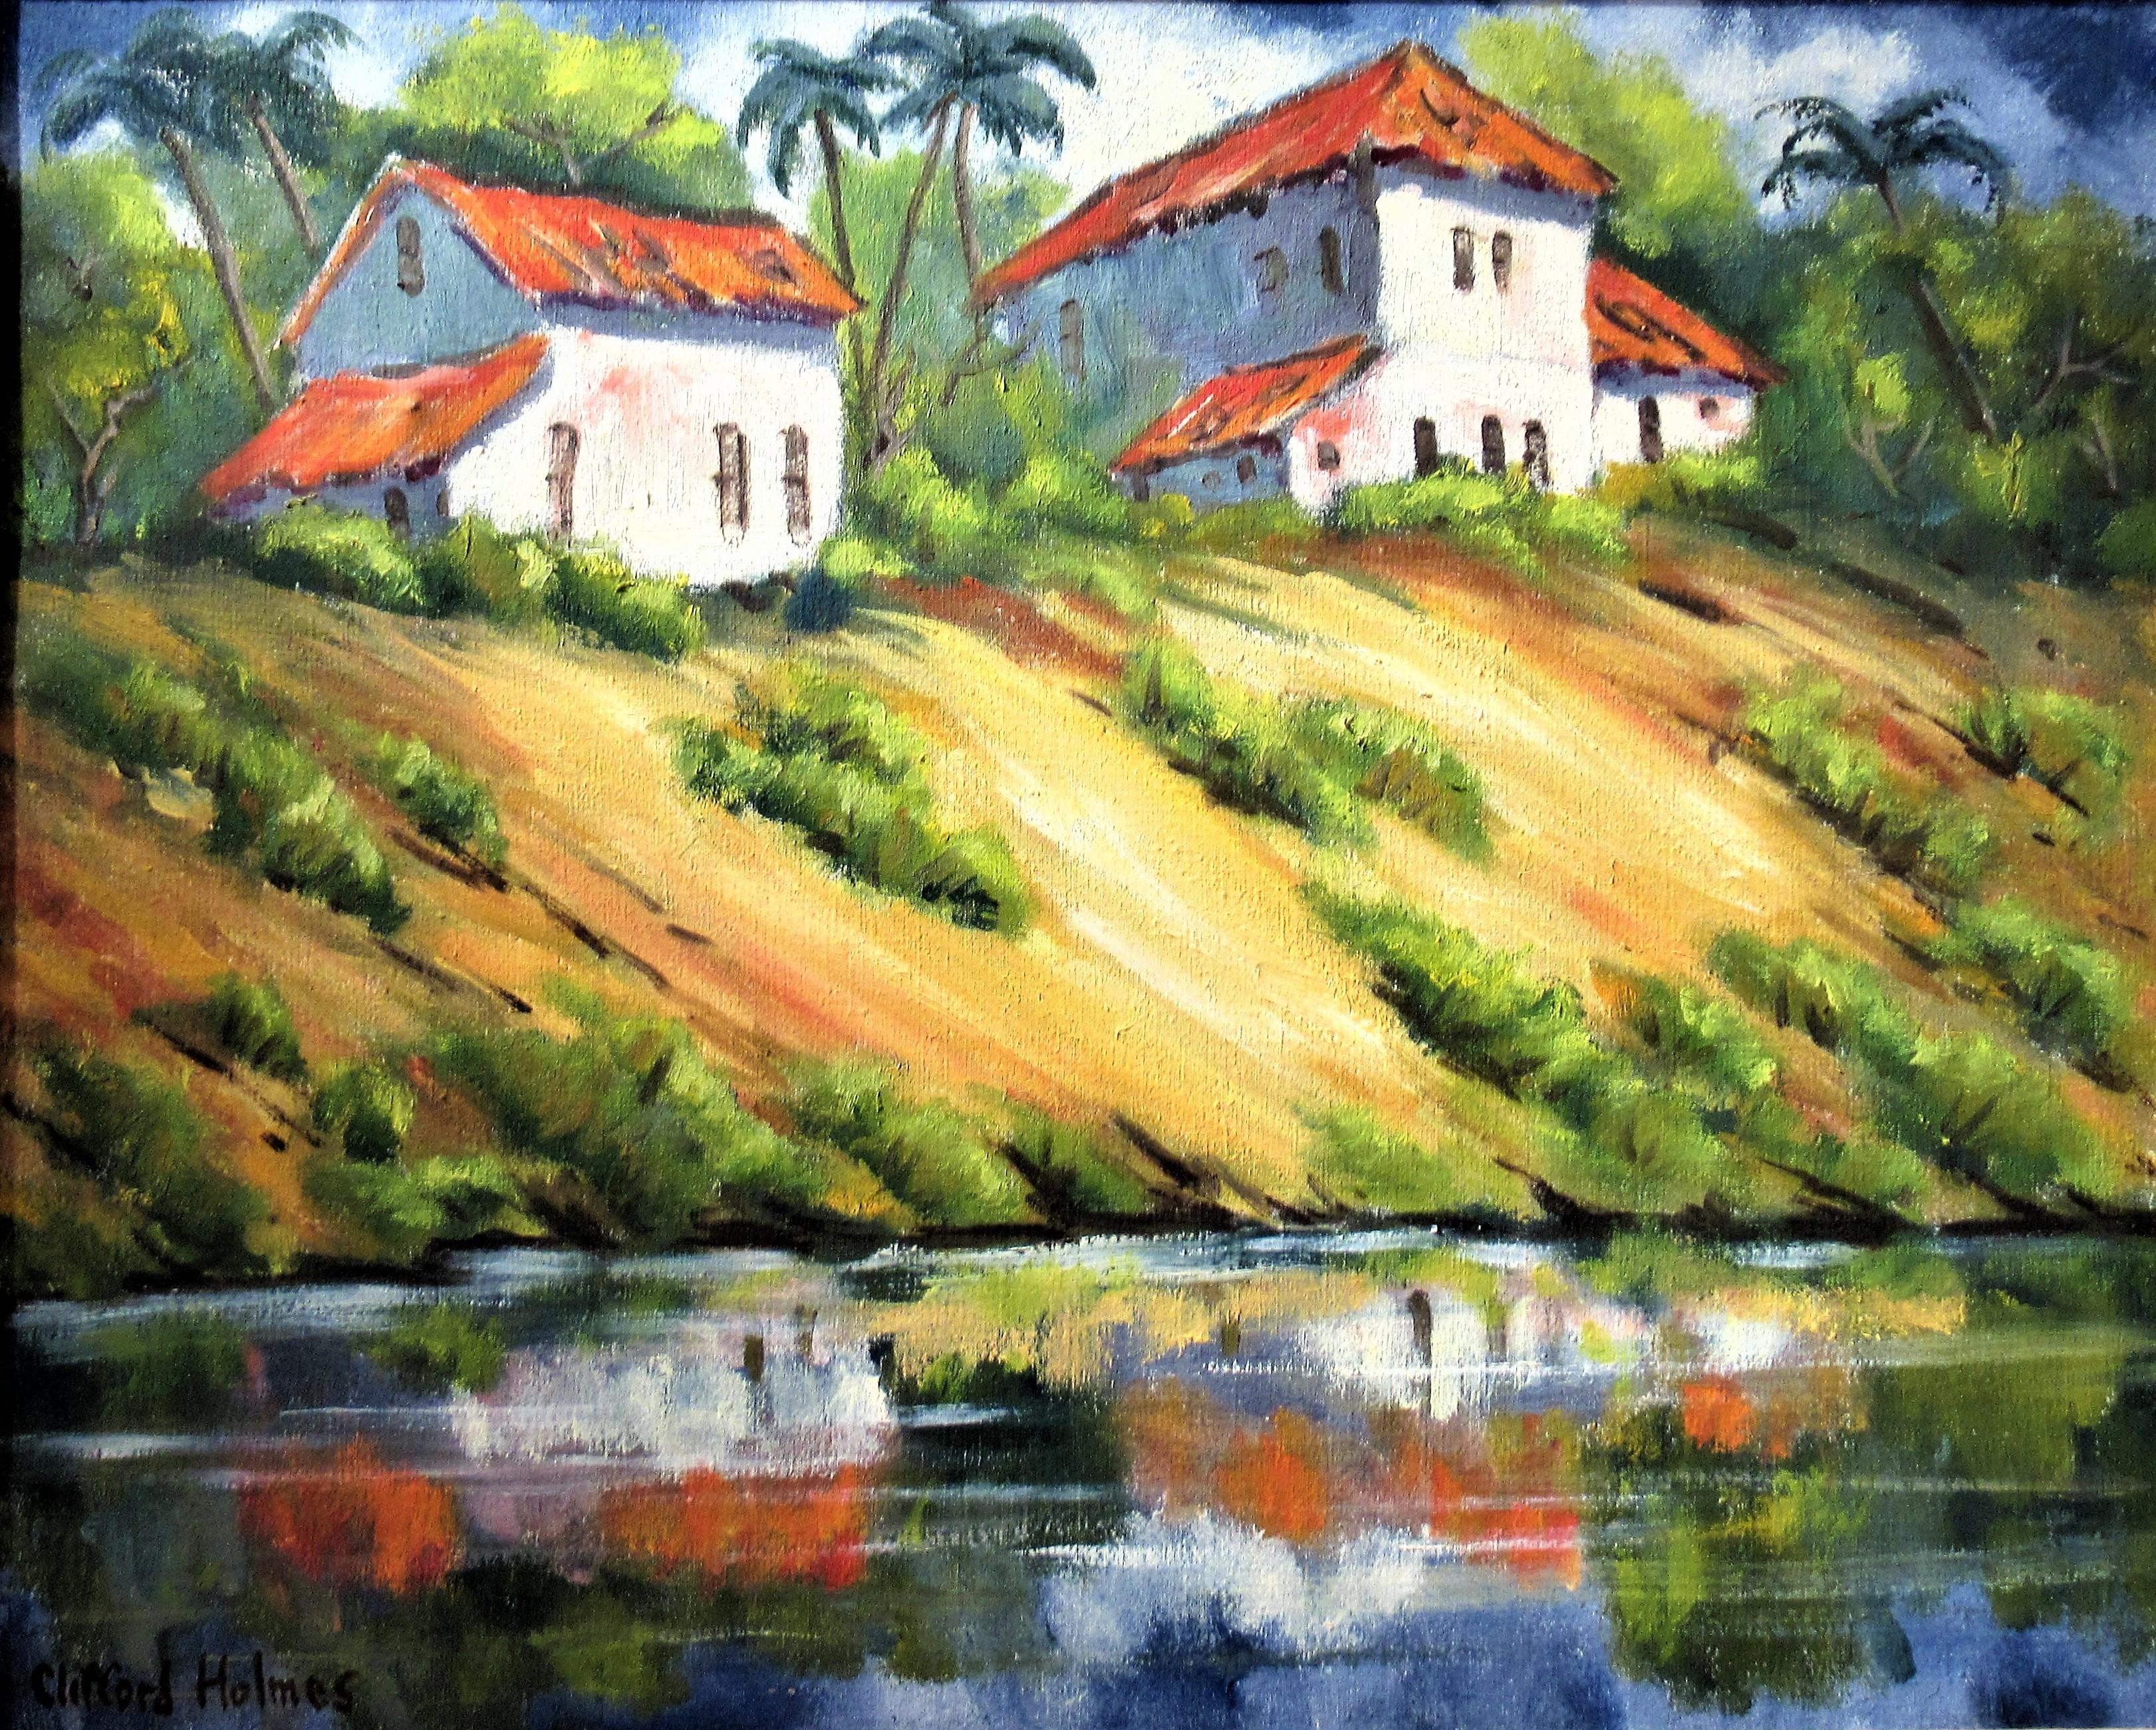 Landscape with Houses and Pond, California - Painting by Clifford Holmes